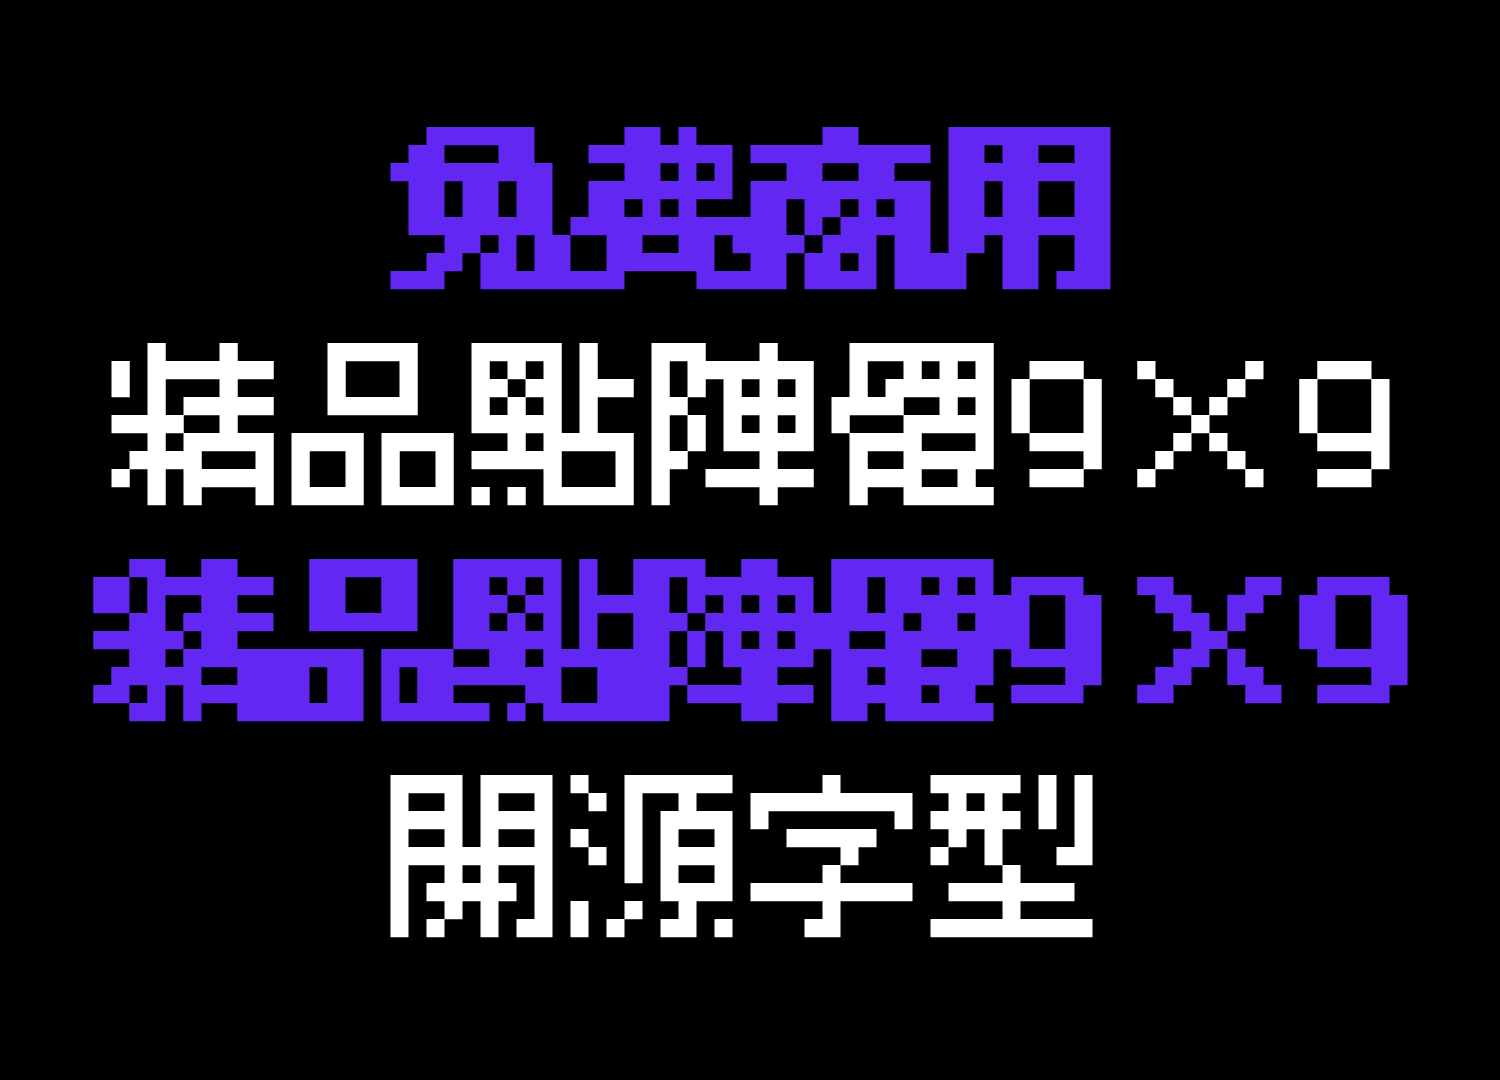 Boutique Bitmap 9x9, an OFL Chinese bitmap font family